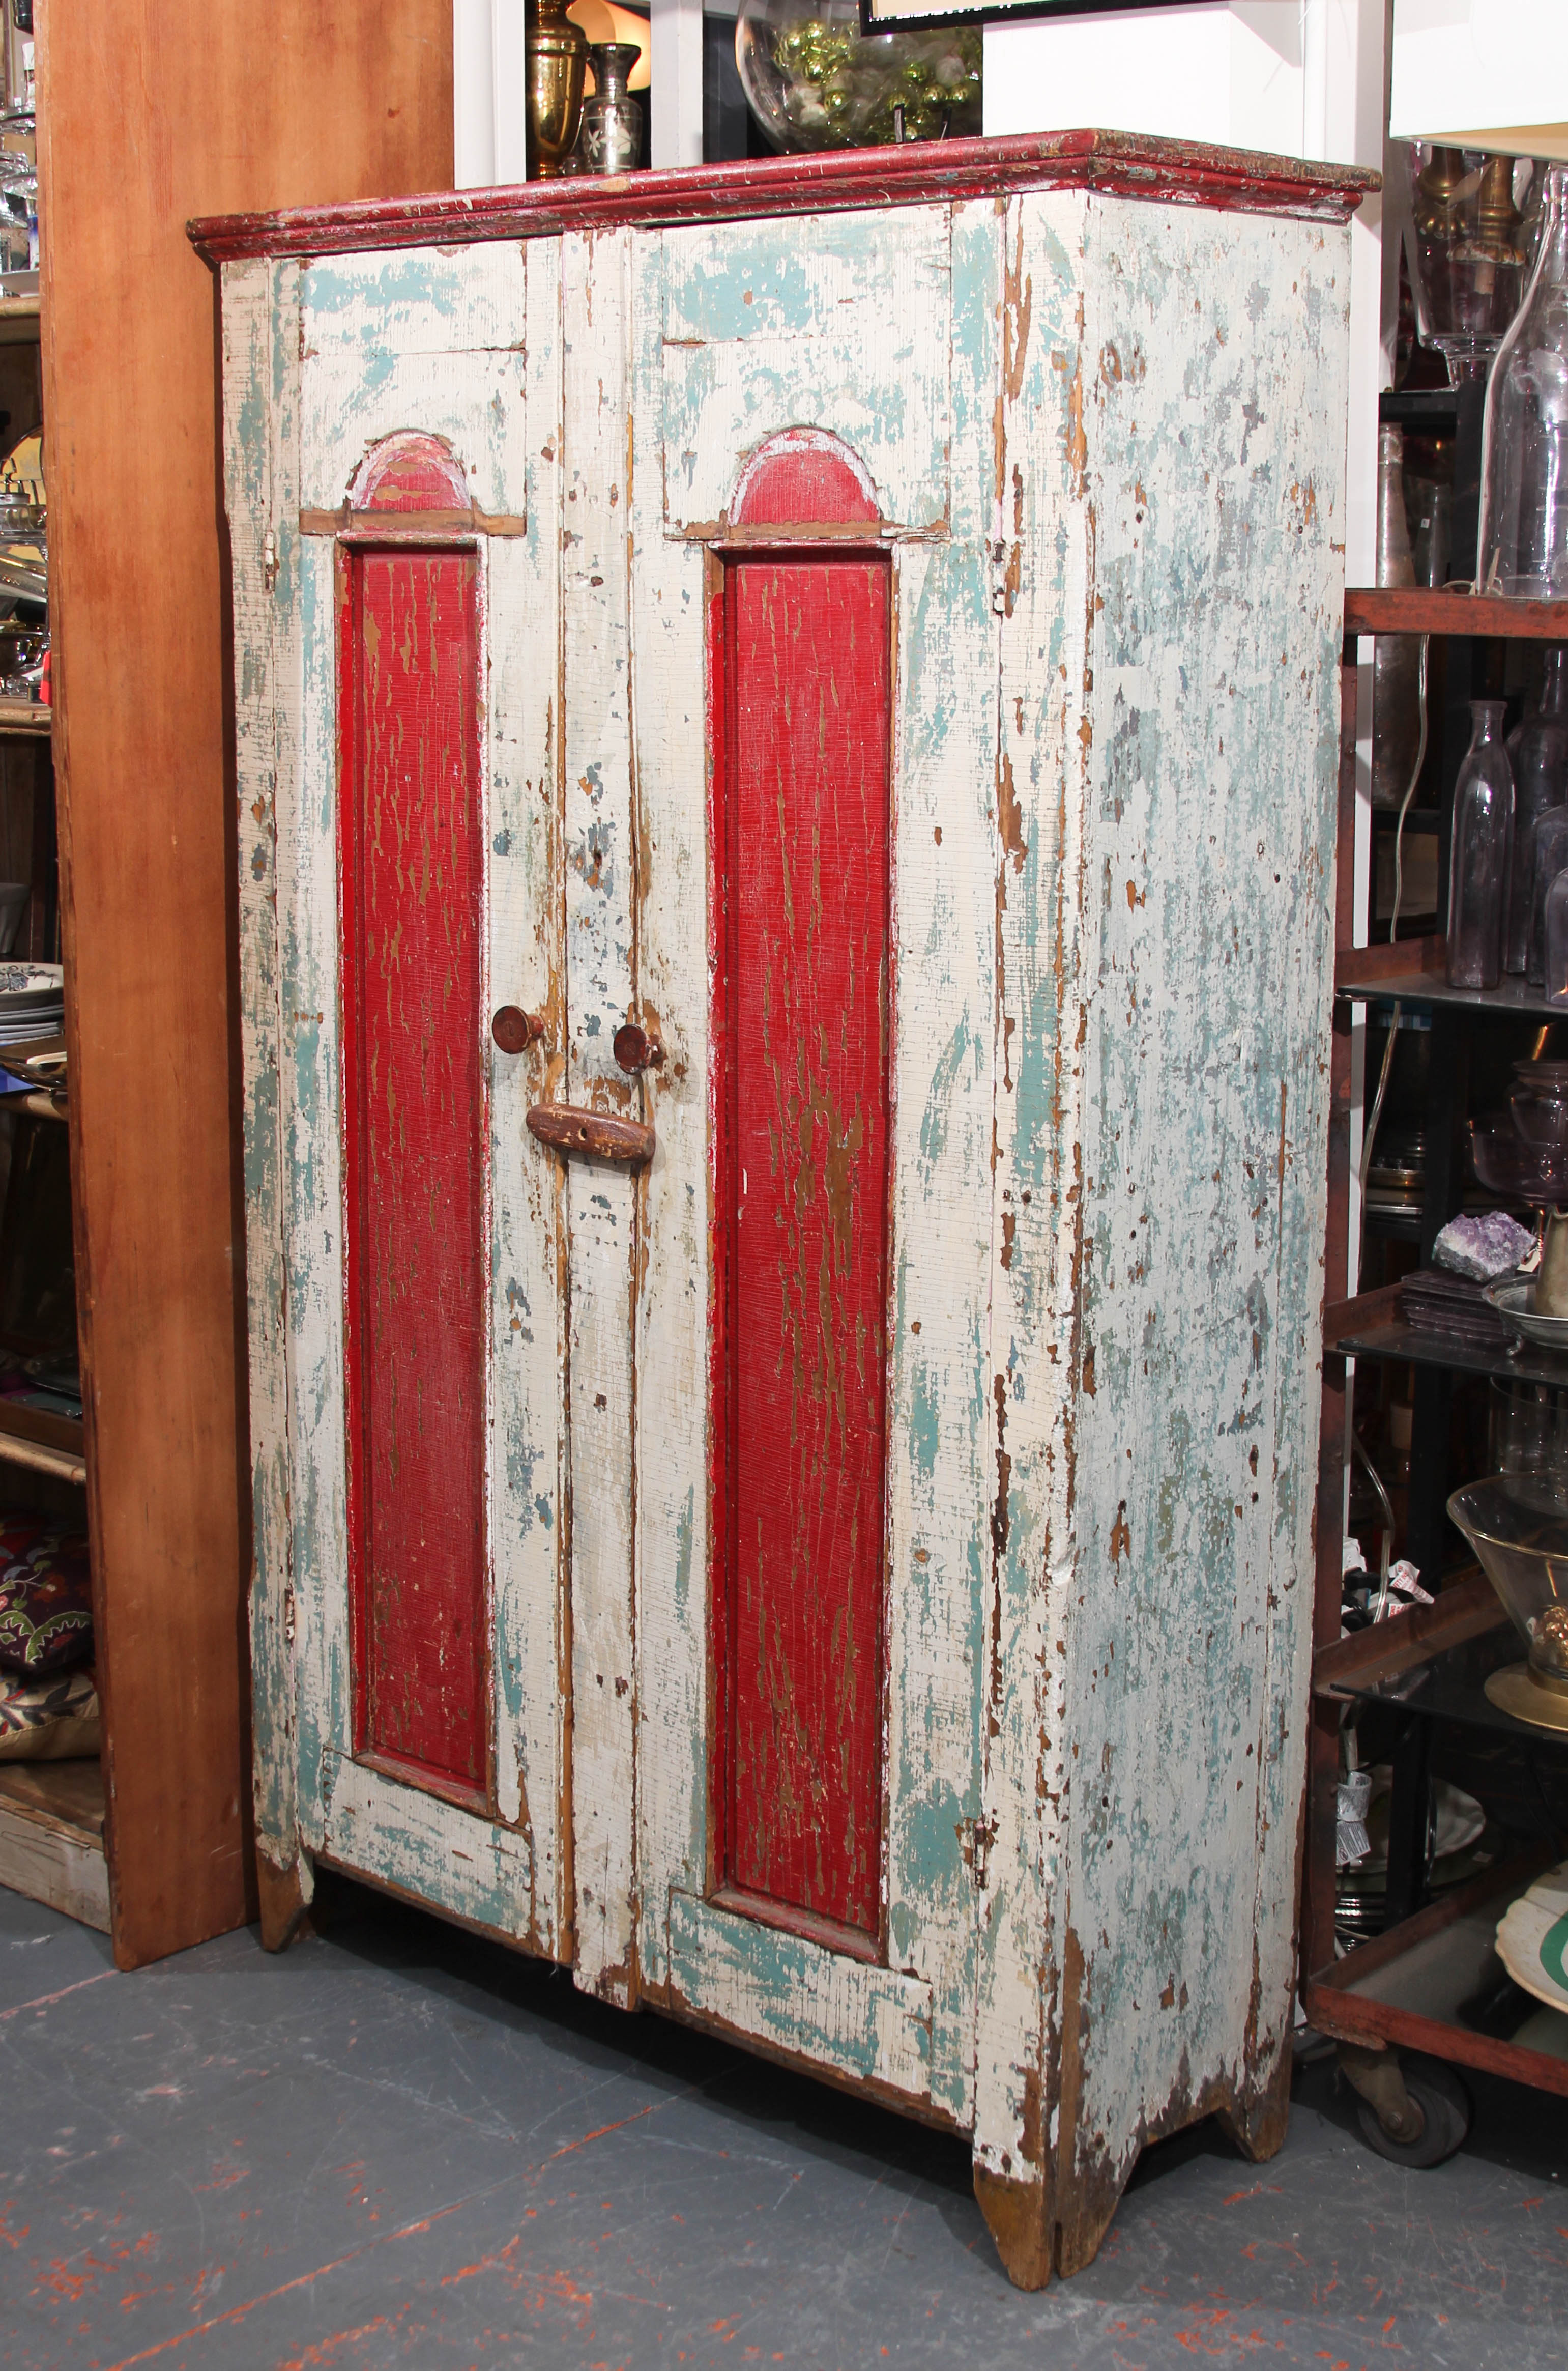 Antique cabinet from American Midwest in great old paint. Shelves inside are perfect for storing clothing , kitchen items or anything else you want close at hand but hidden from view.